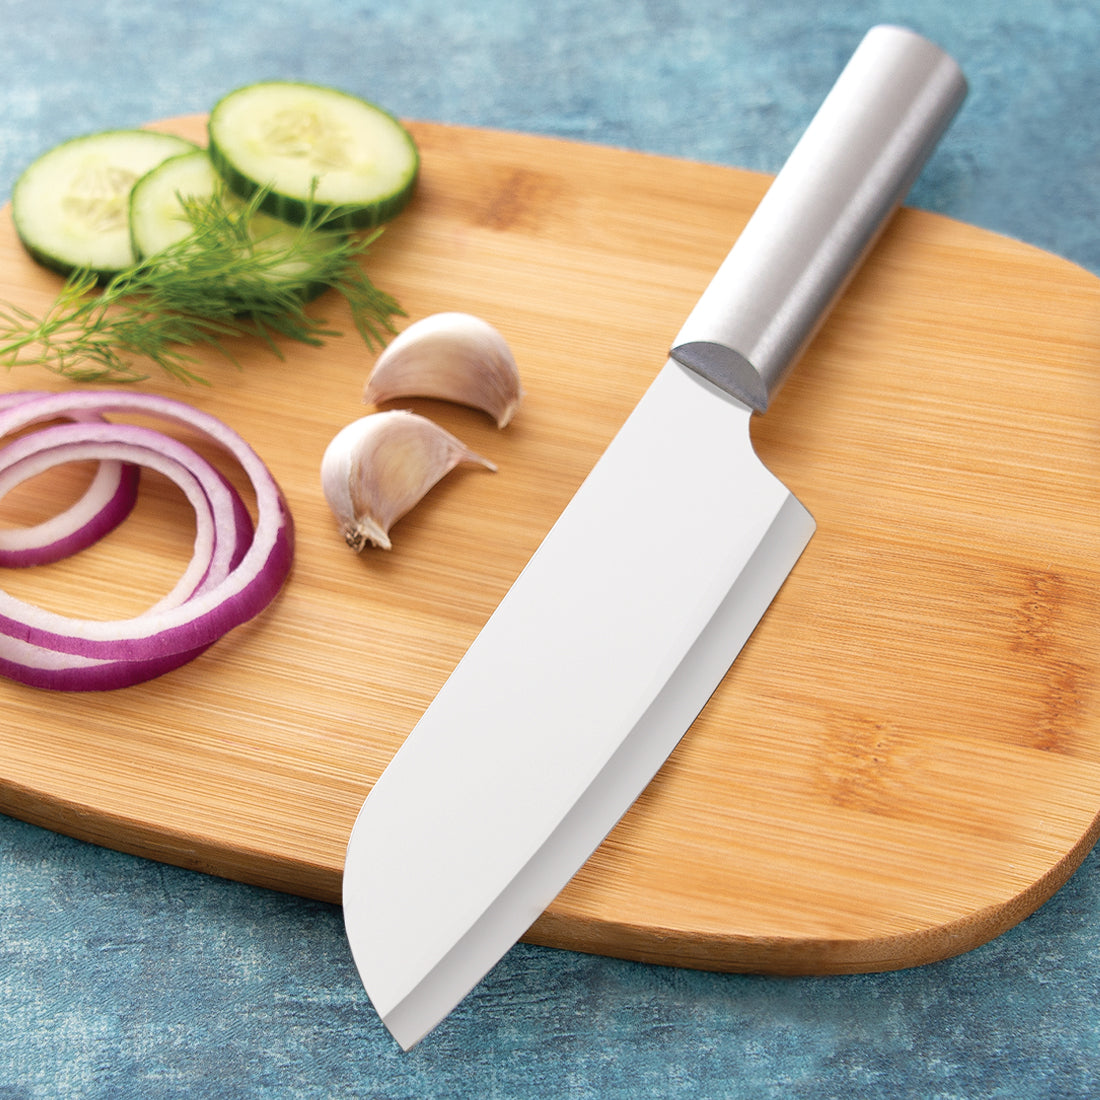 Wooden Handle Versatile Butter Knife for Soft Cheese and Peanut